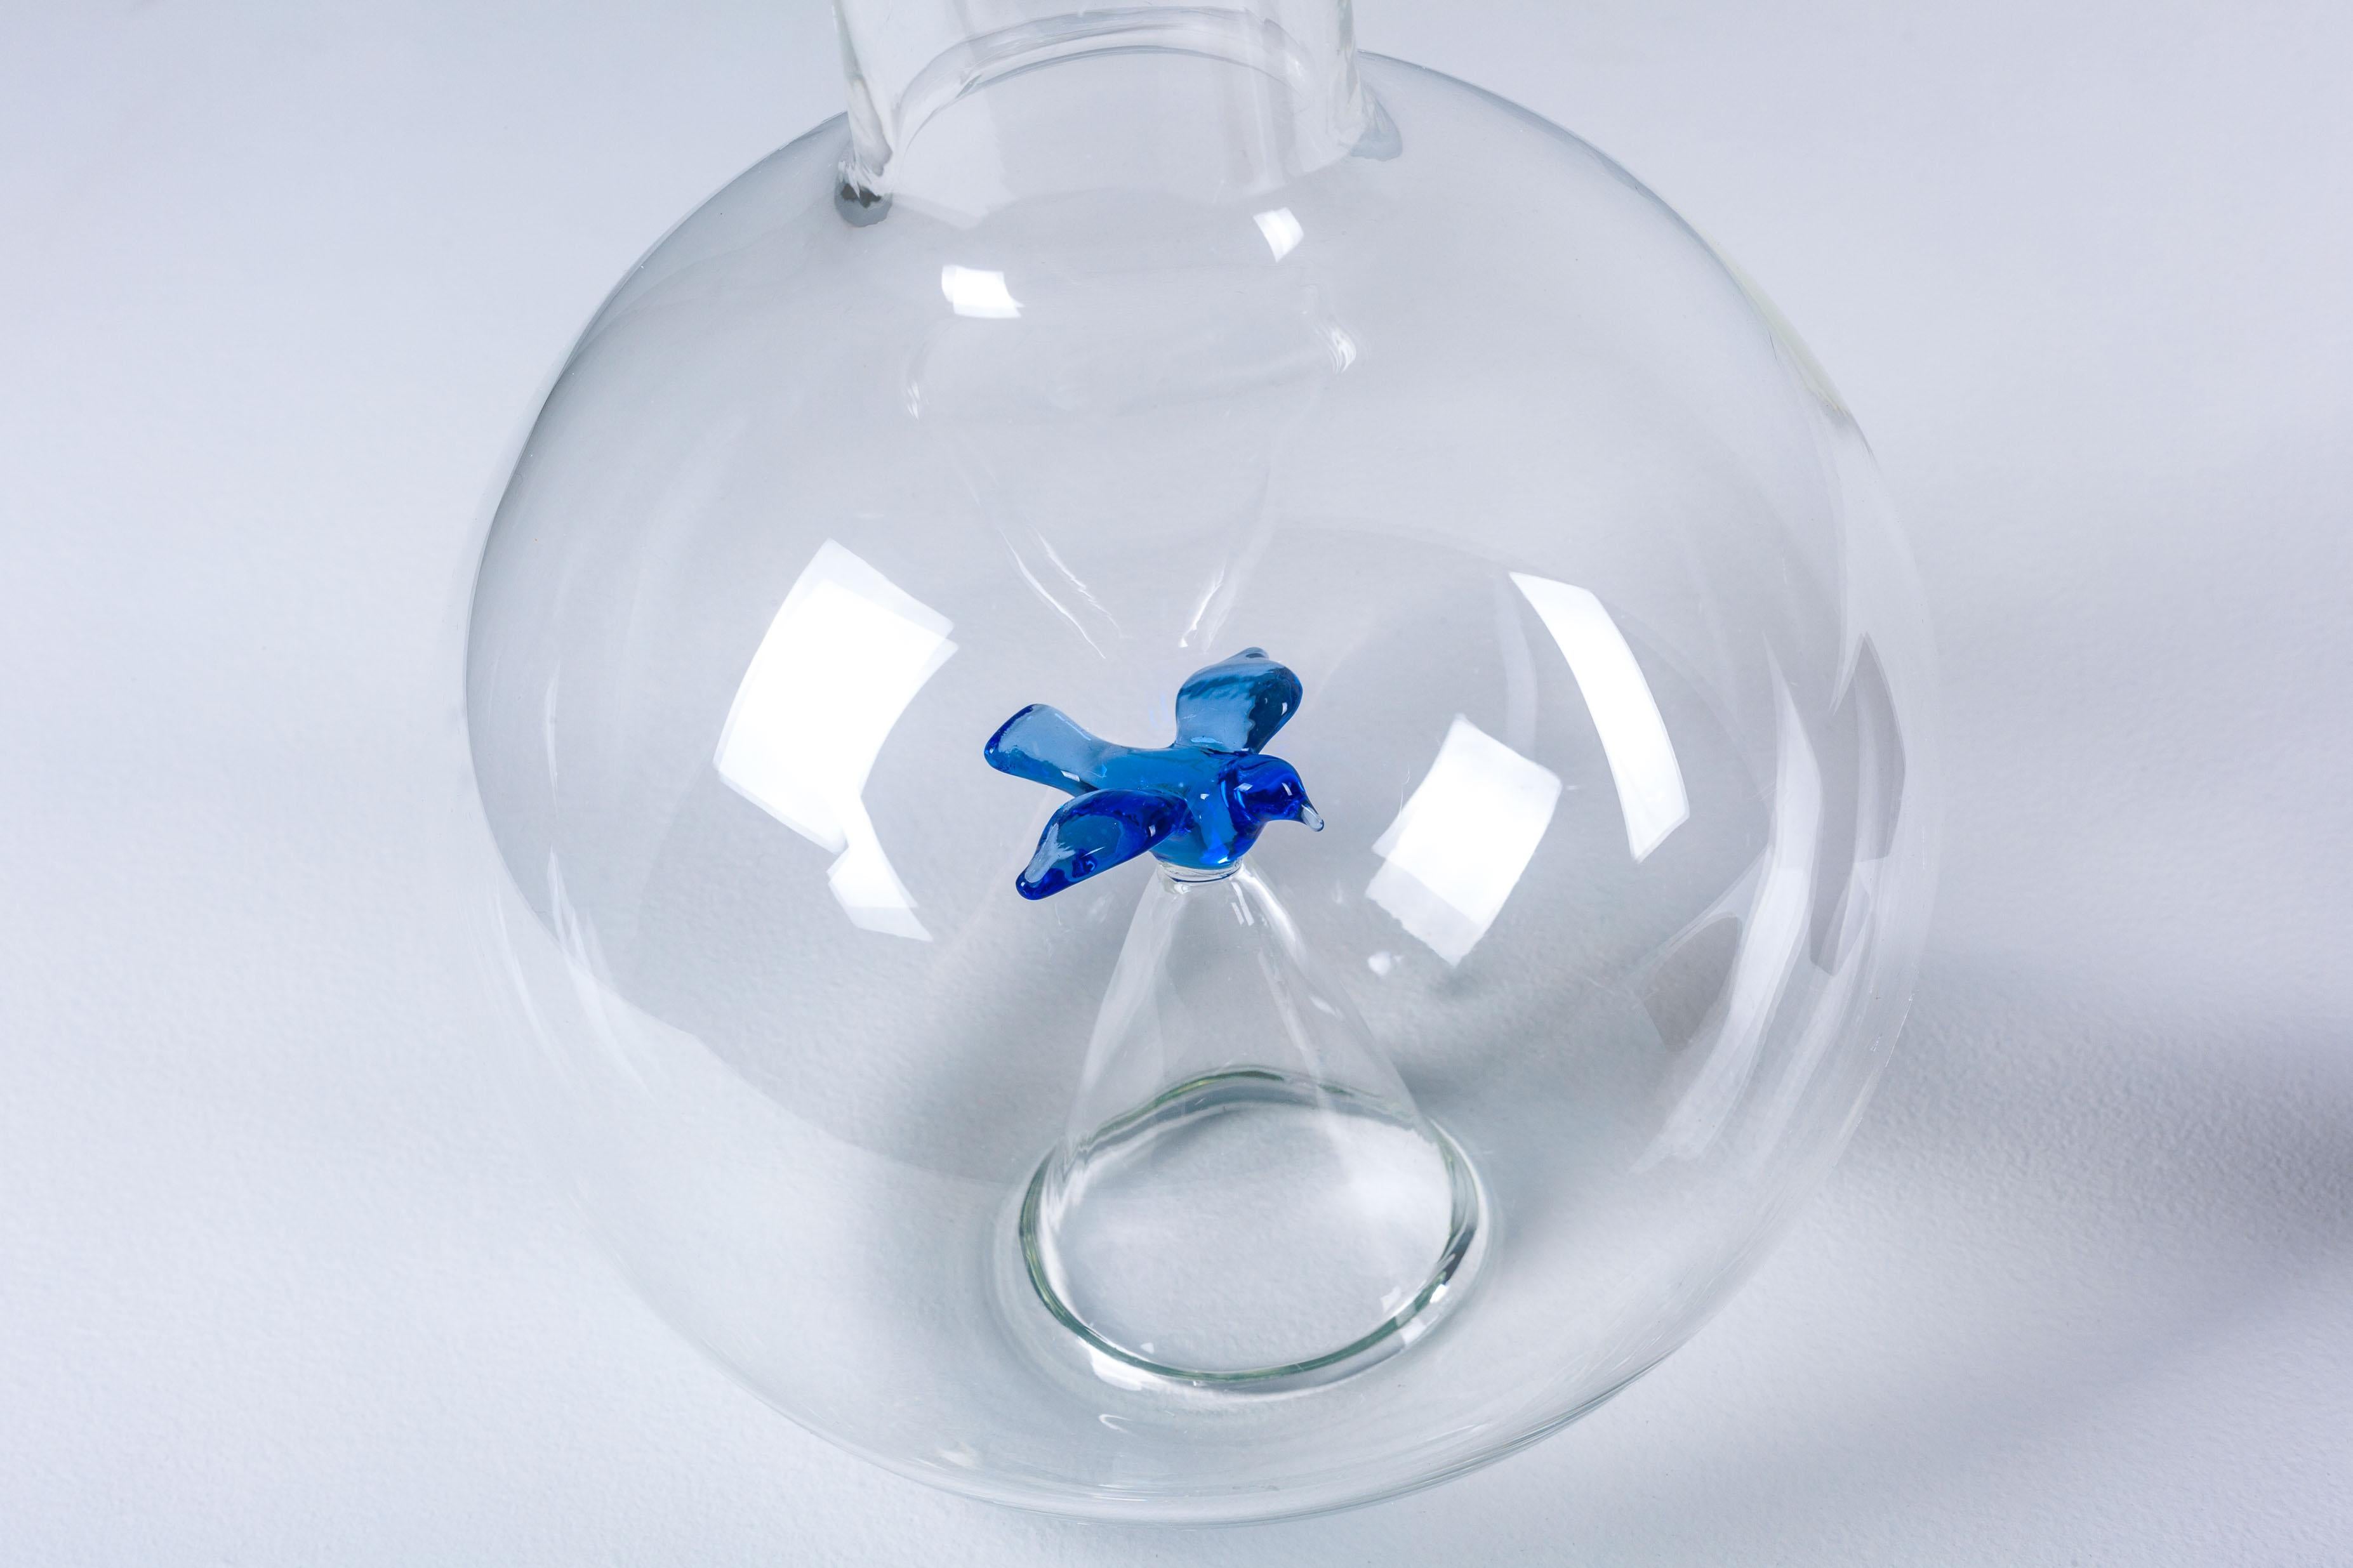 Wine decanter in handblown glass by Michael Graves for JcPenney in 2013 USA. It is a new unused piece that comes with its original box. Decanter: 12 x 6 inches. A remarkably delicate and clever design. The glass blue bird serves as an aerator for